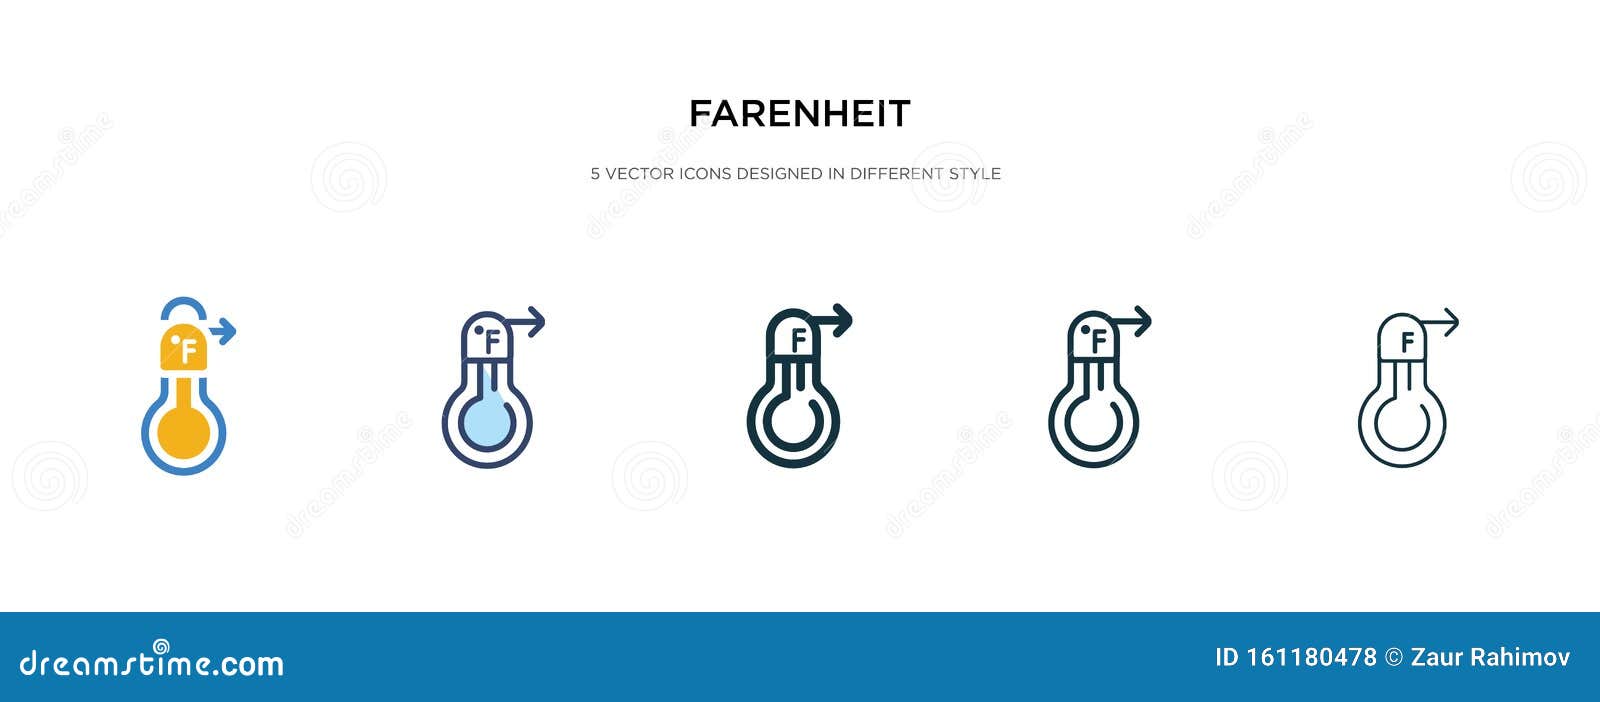 farenheit icon in different style  . two colored and black farenheit  icons ed in filled, outline,